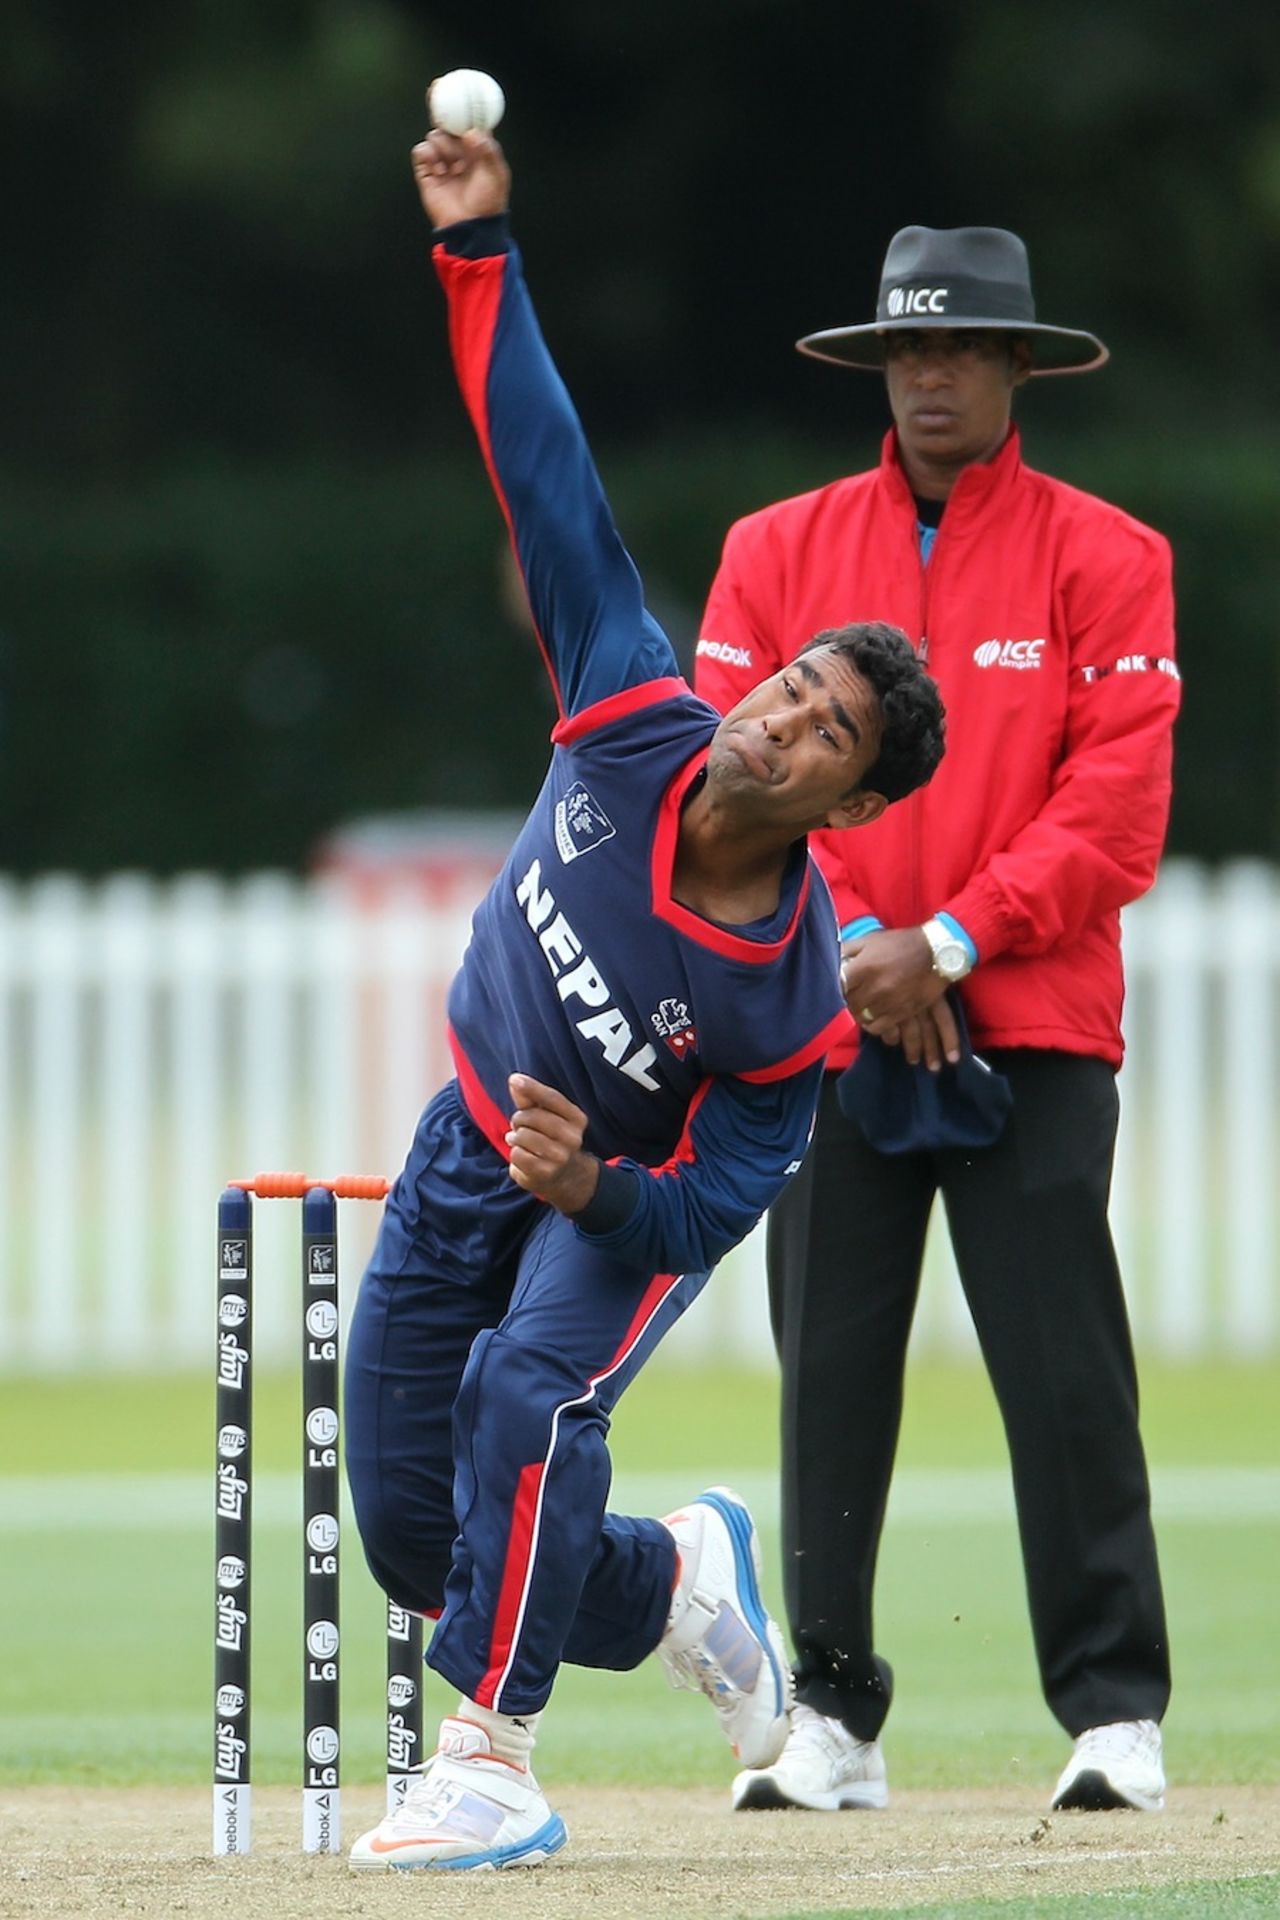 Jitendra Mukhiya bowled five overs and conceded 47 runs, Canada v Nepal, ICC World Cup Qualifier, Group A, Christchurch, January 21, 2014